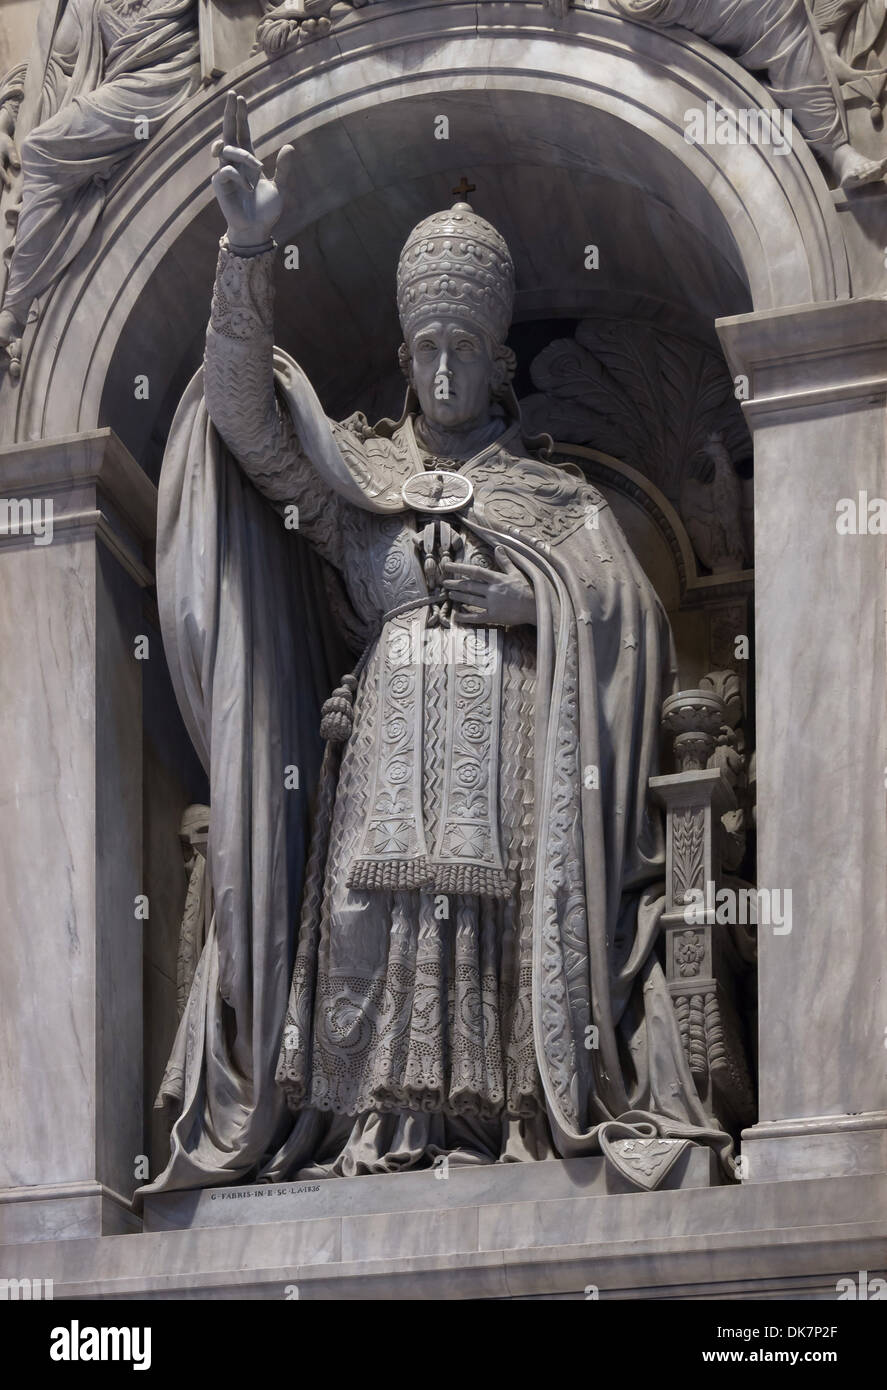 Statue to pope Leo XII, by Guiseppe Fabris, Saint Peter's Basilica, Vatican City. Stock Photo